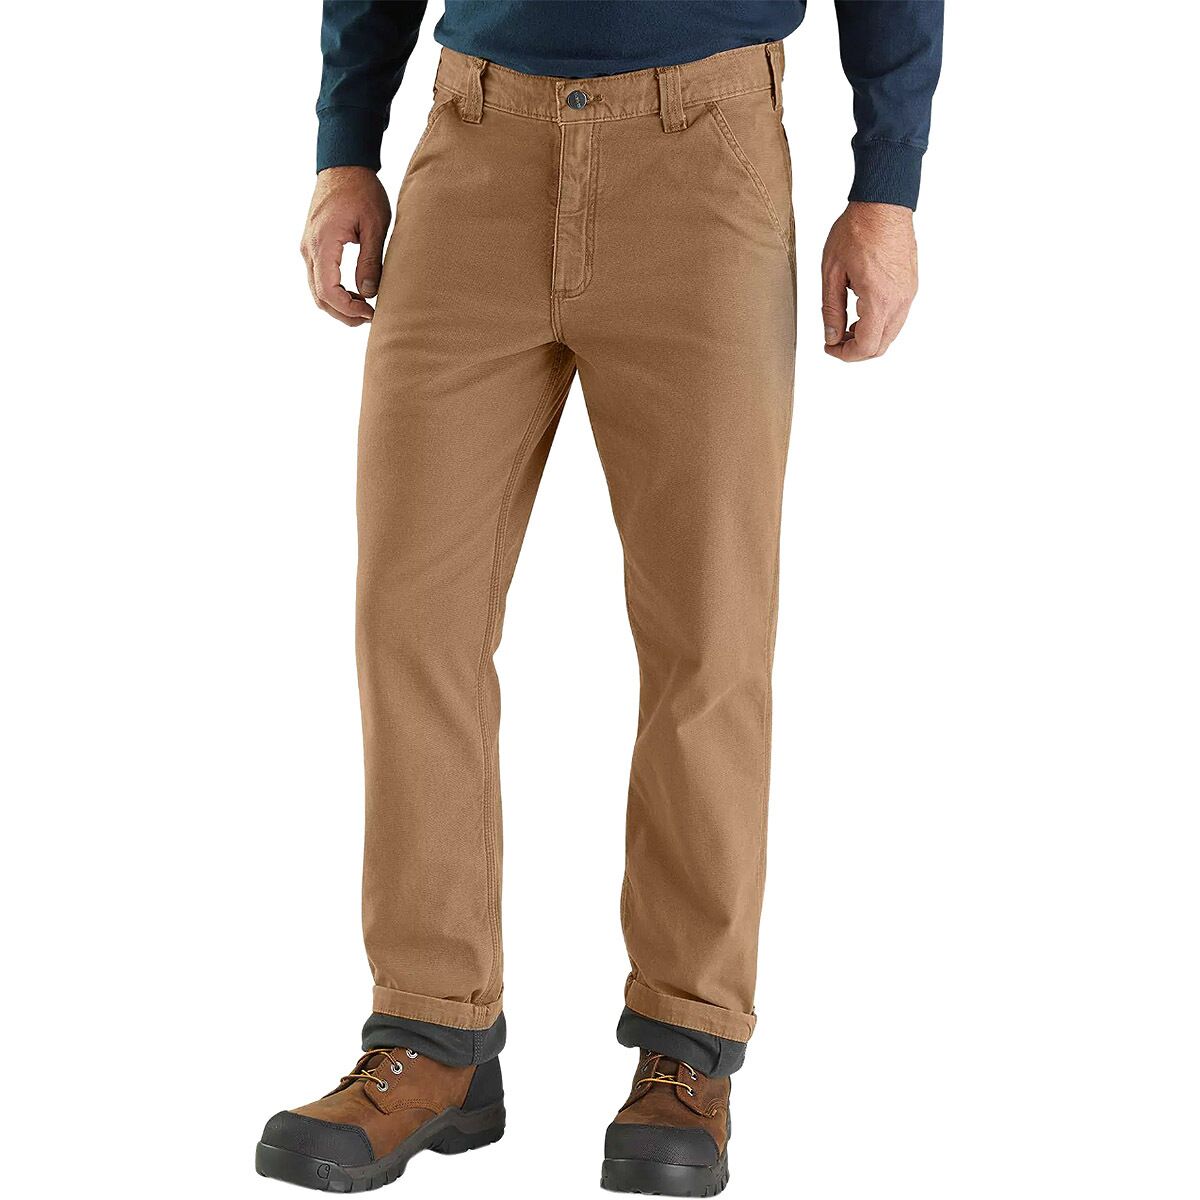 Carhartt Rugged Flex Rigby Dungaree Knit Lined Pant - Men's